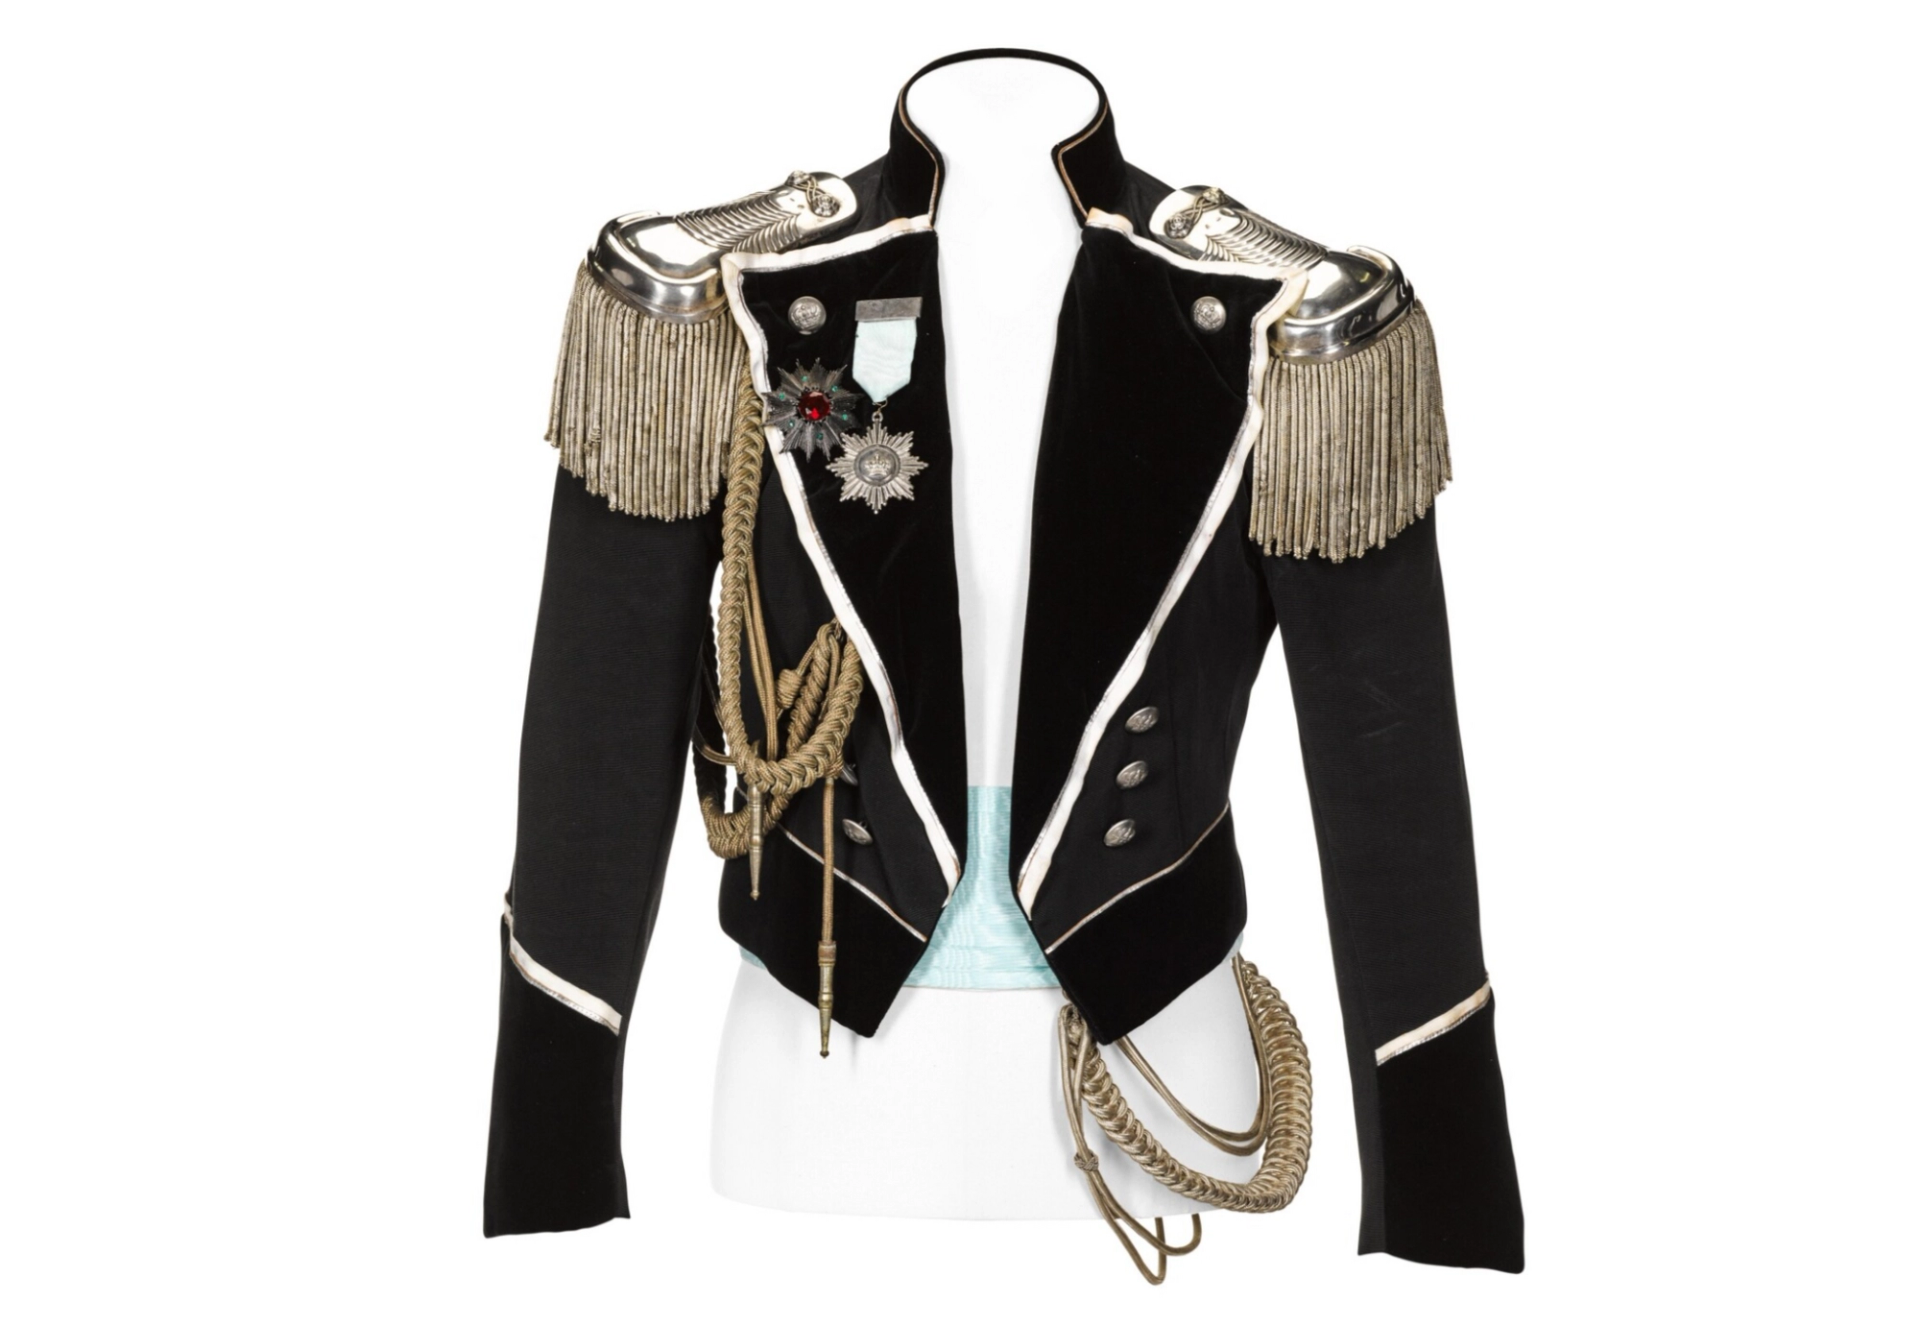 A lavish ceremonial military-style jacket created for Freddie Mercury's 39th birthday party. It is done in black, with silver epaulettes and ceremonial ropes around the waist.